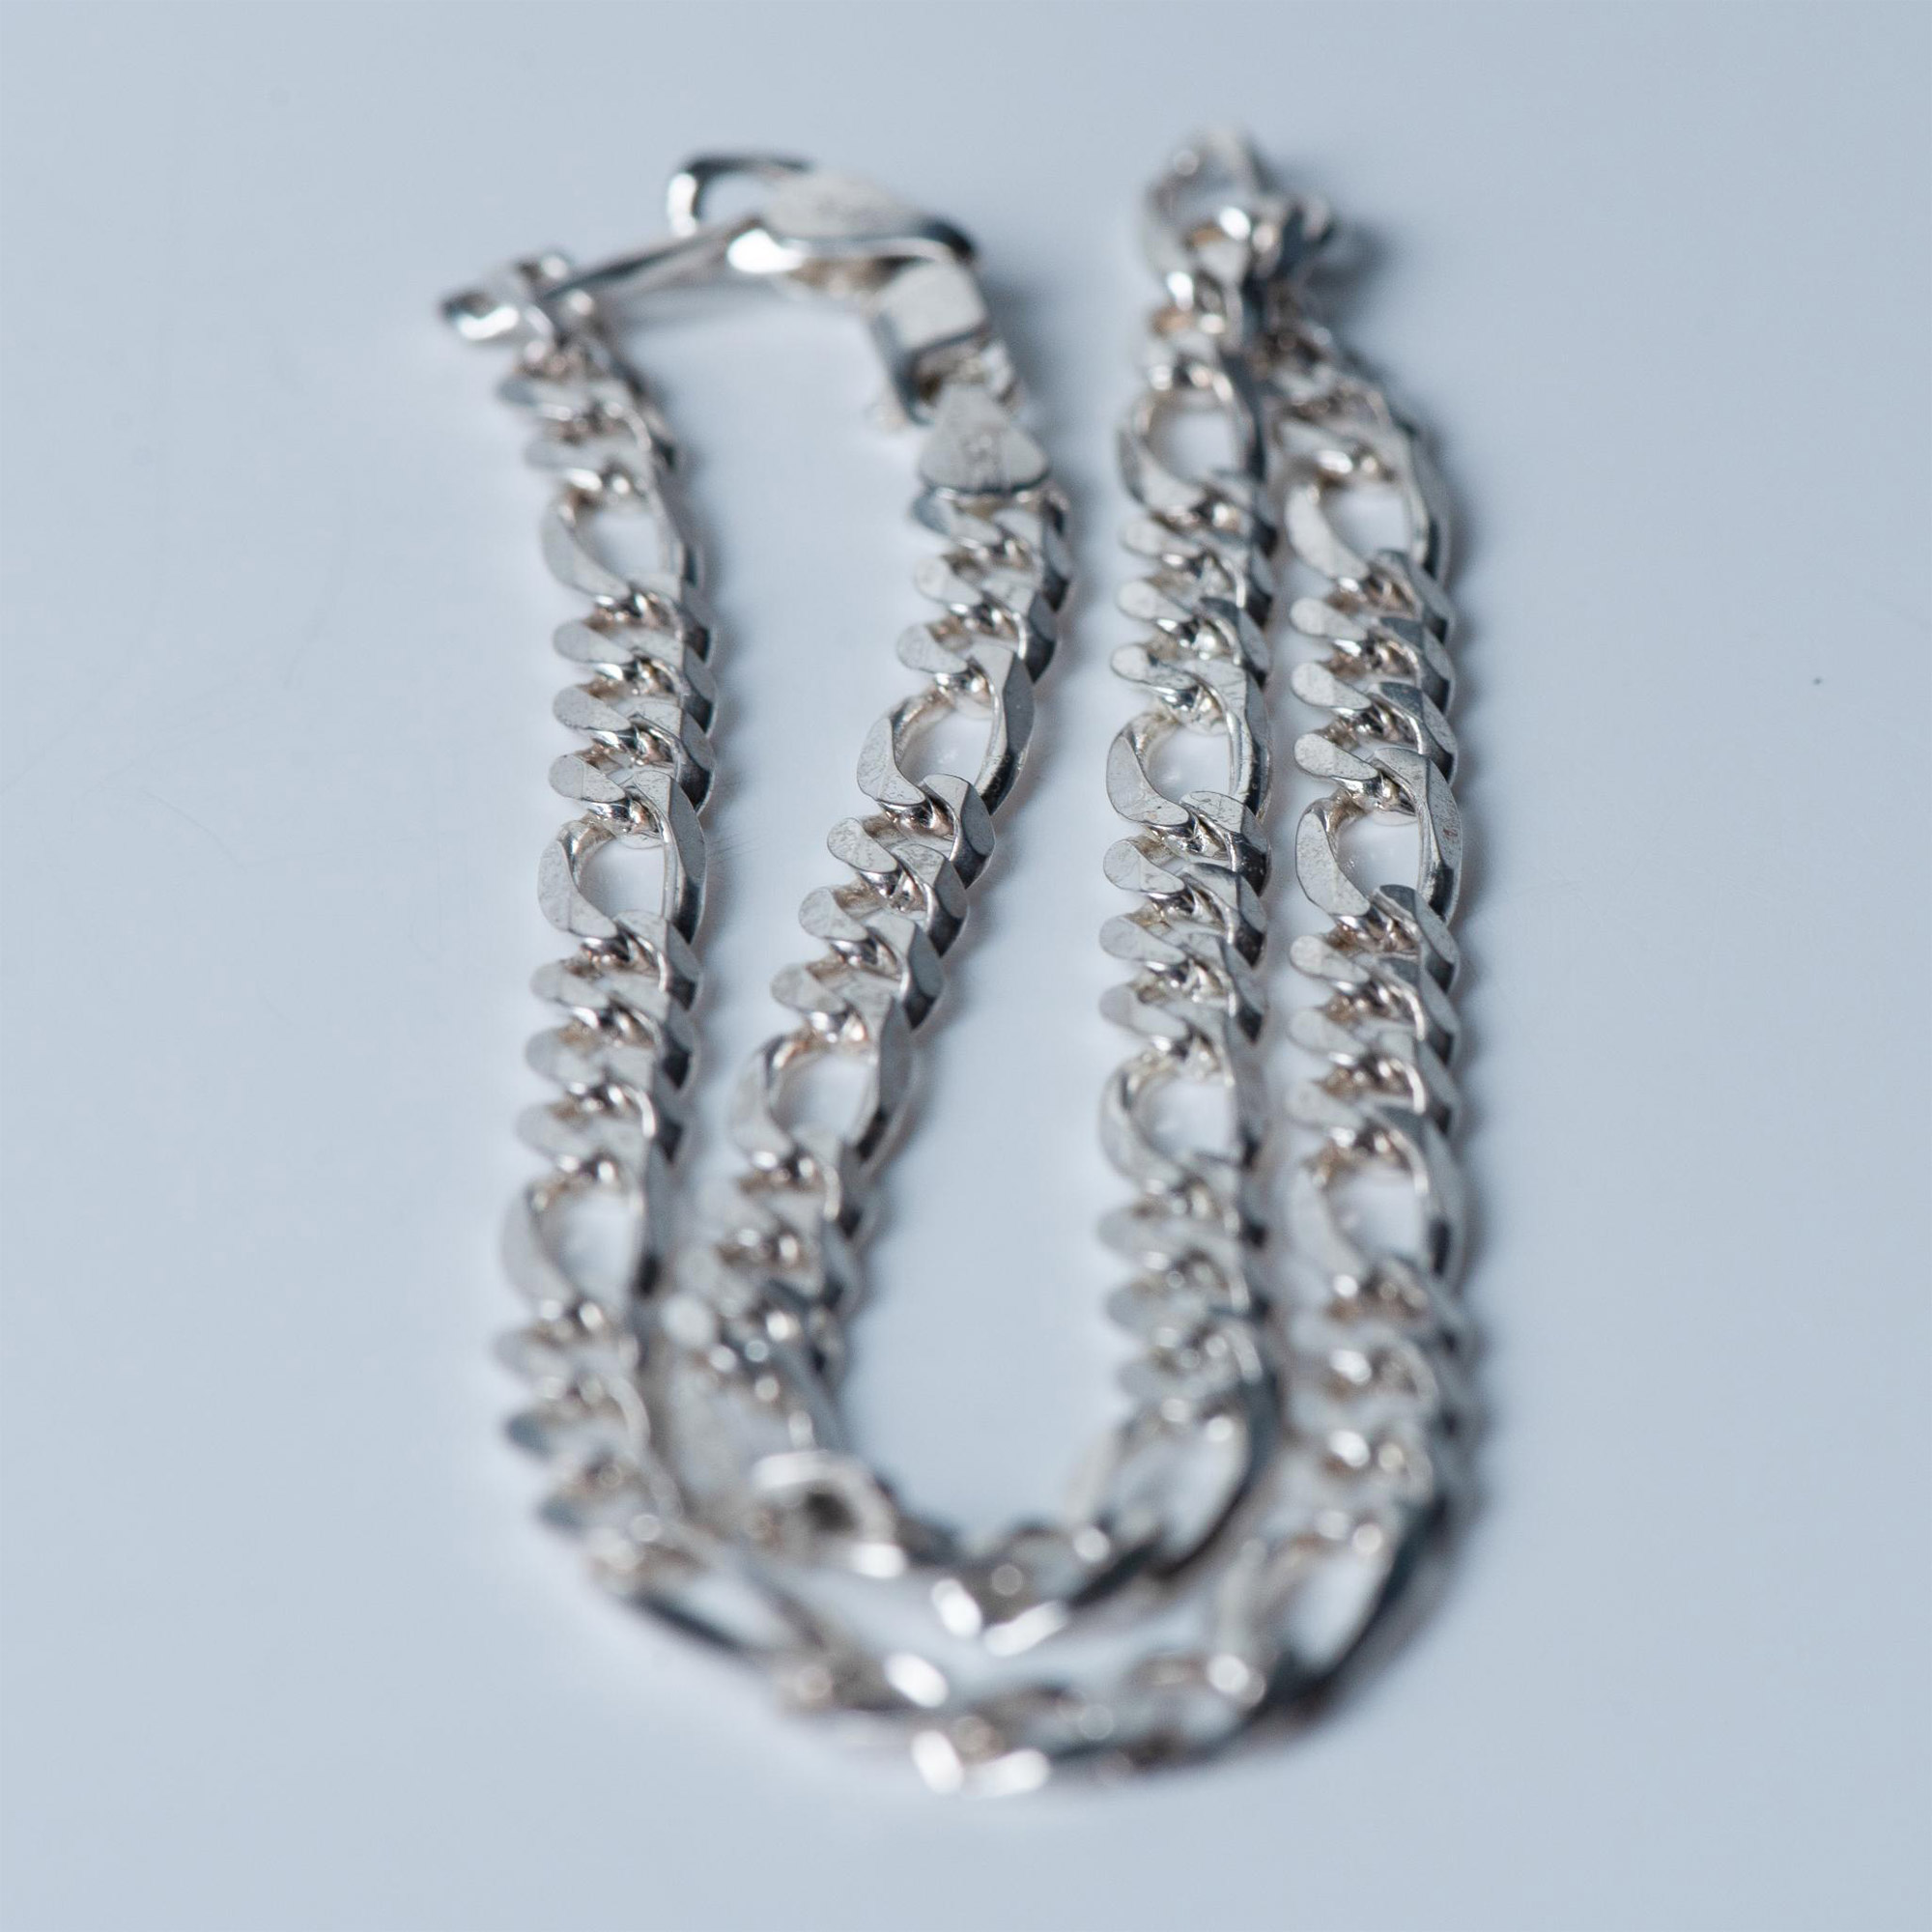 Sterling Silver Figaro Link Chain Necklace - Image 2 of 3